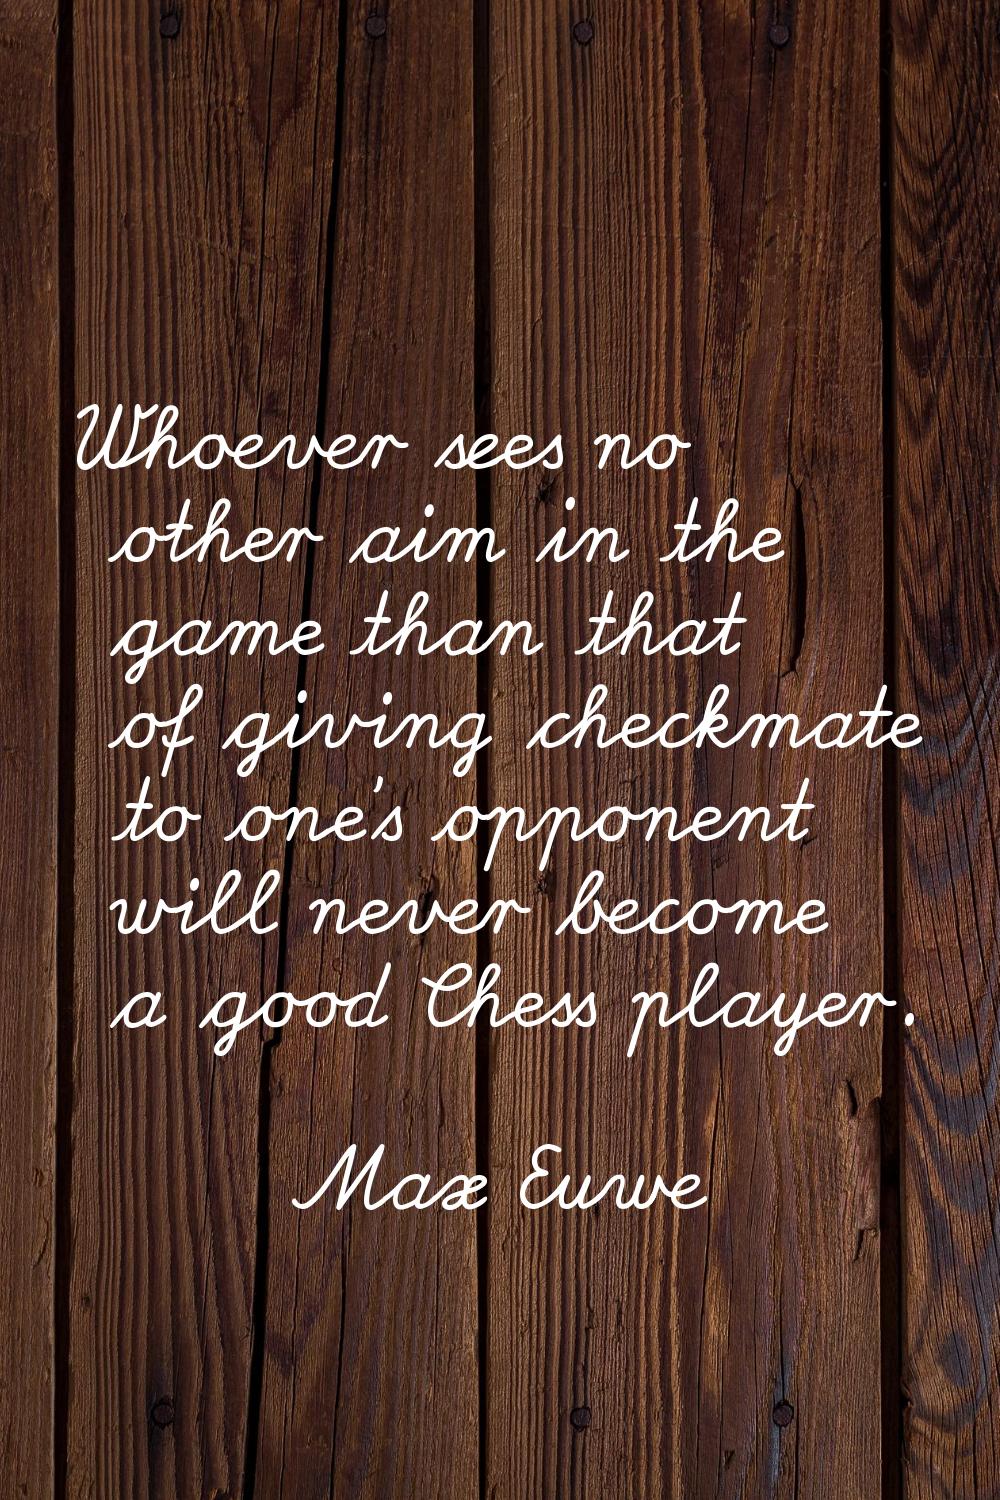 Whoever sees no other aim in the game than that of giving checkmate to one's opponent will never be